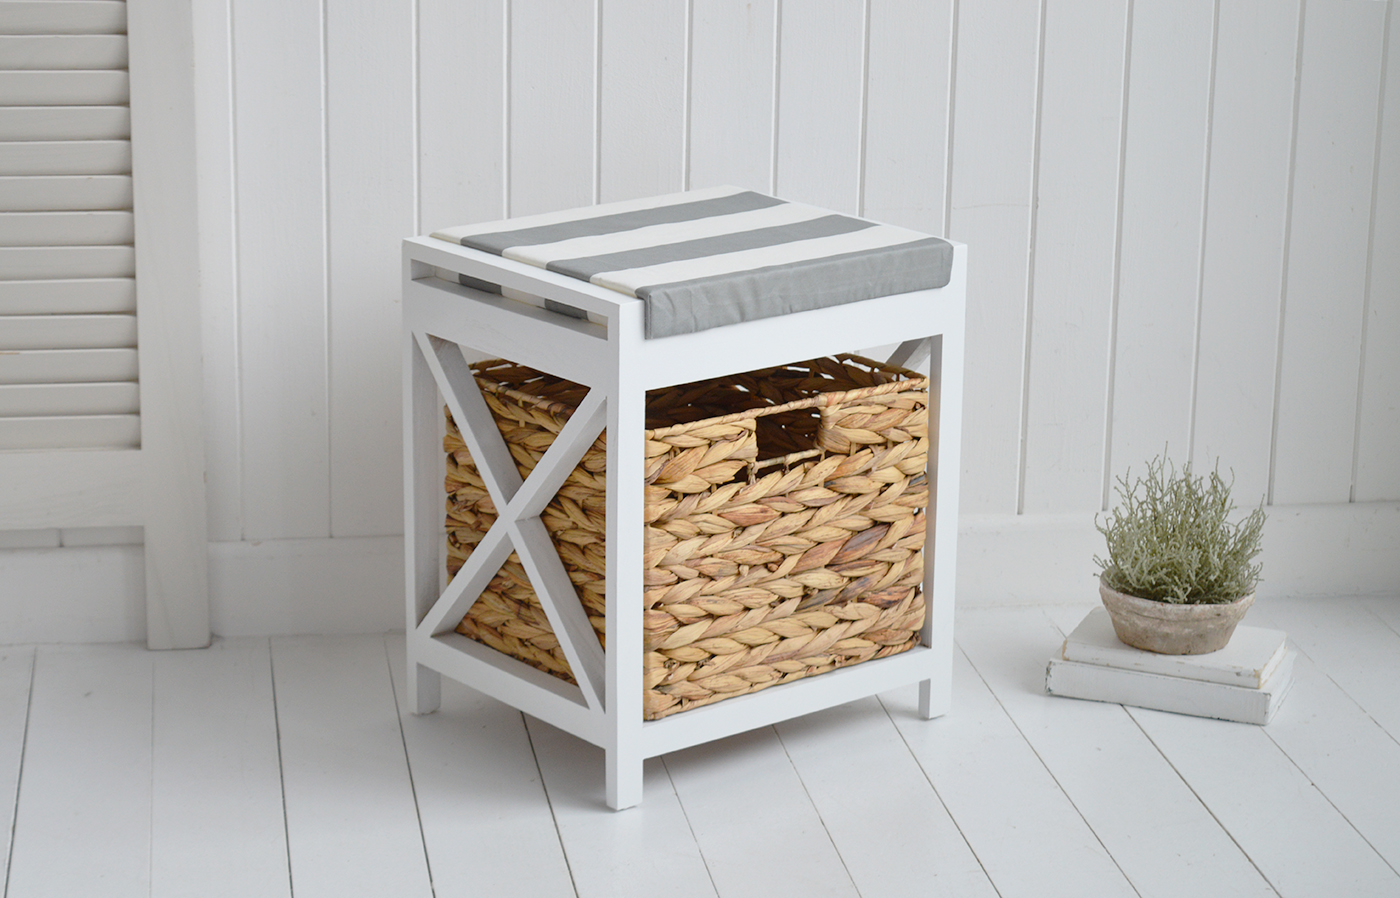 Northport White Storage Seat with basket and cushion - New England Modern Farmhouse and Coastal Storage Furniture